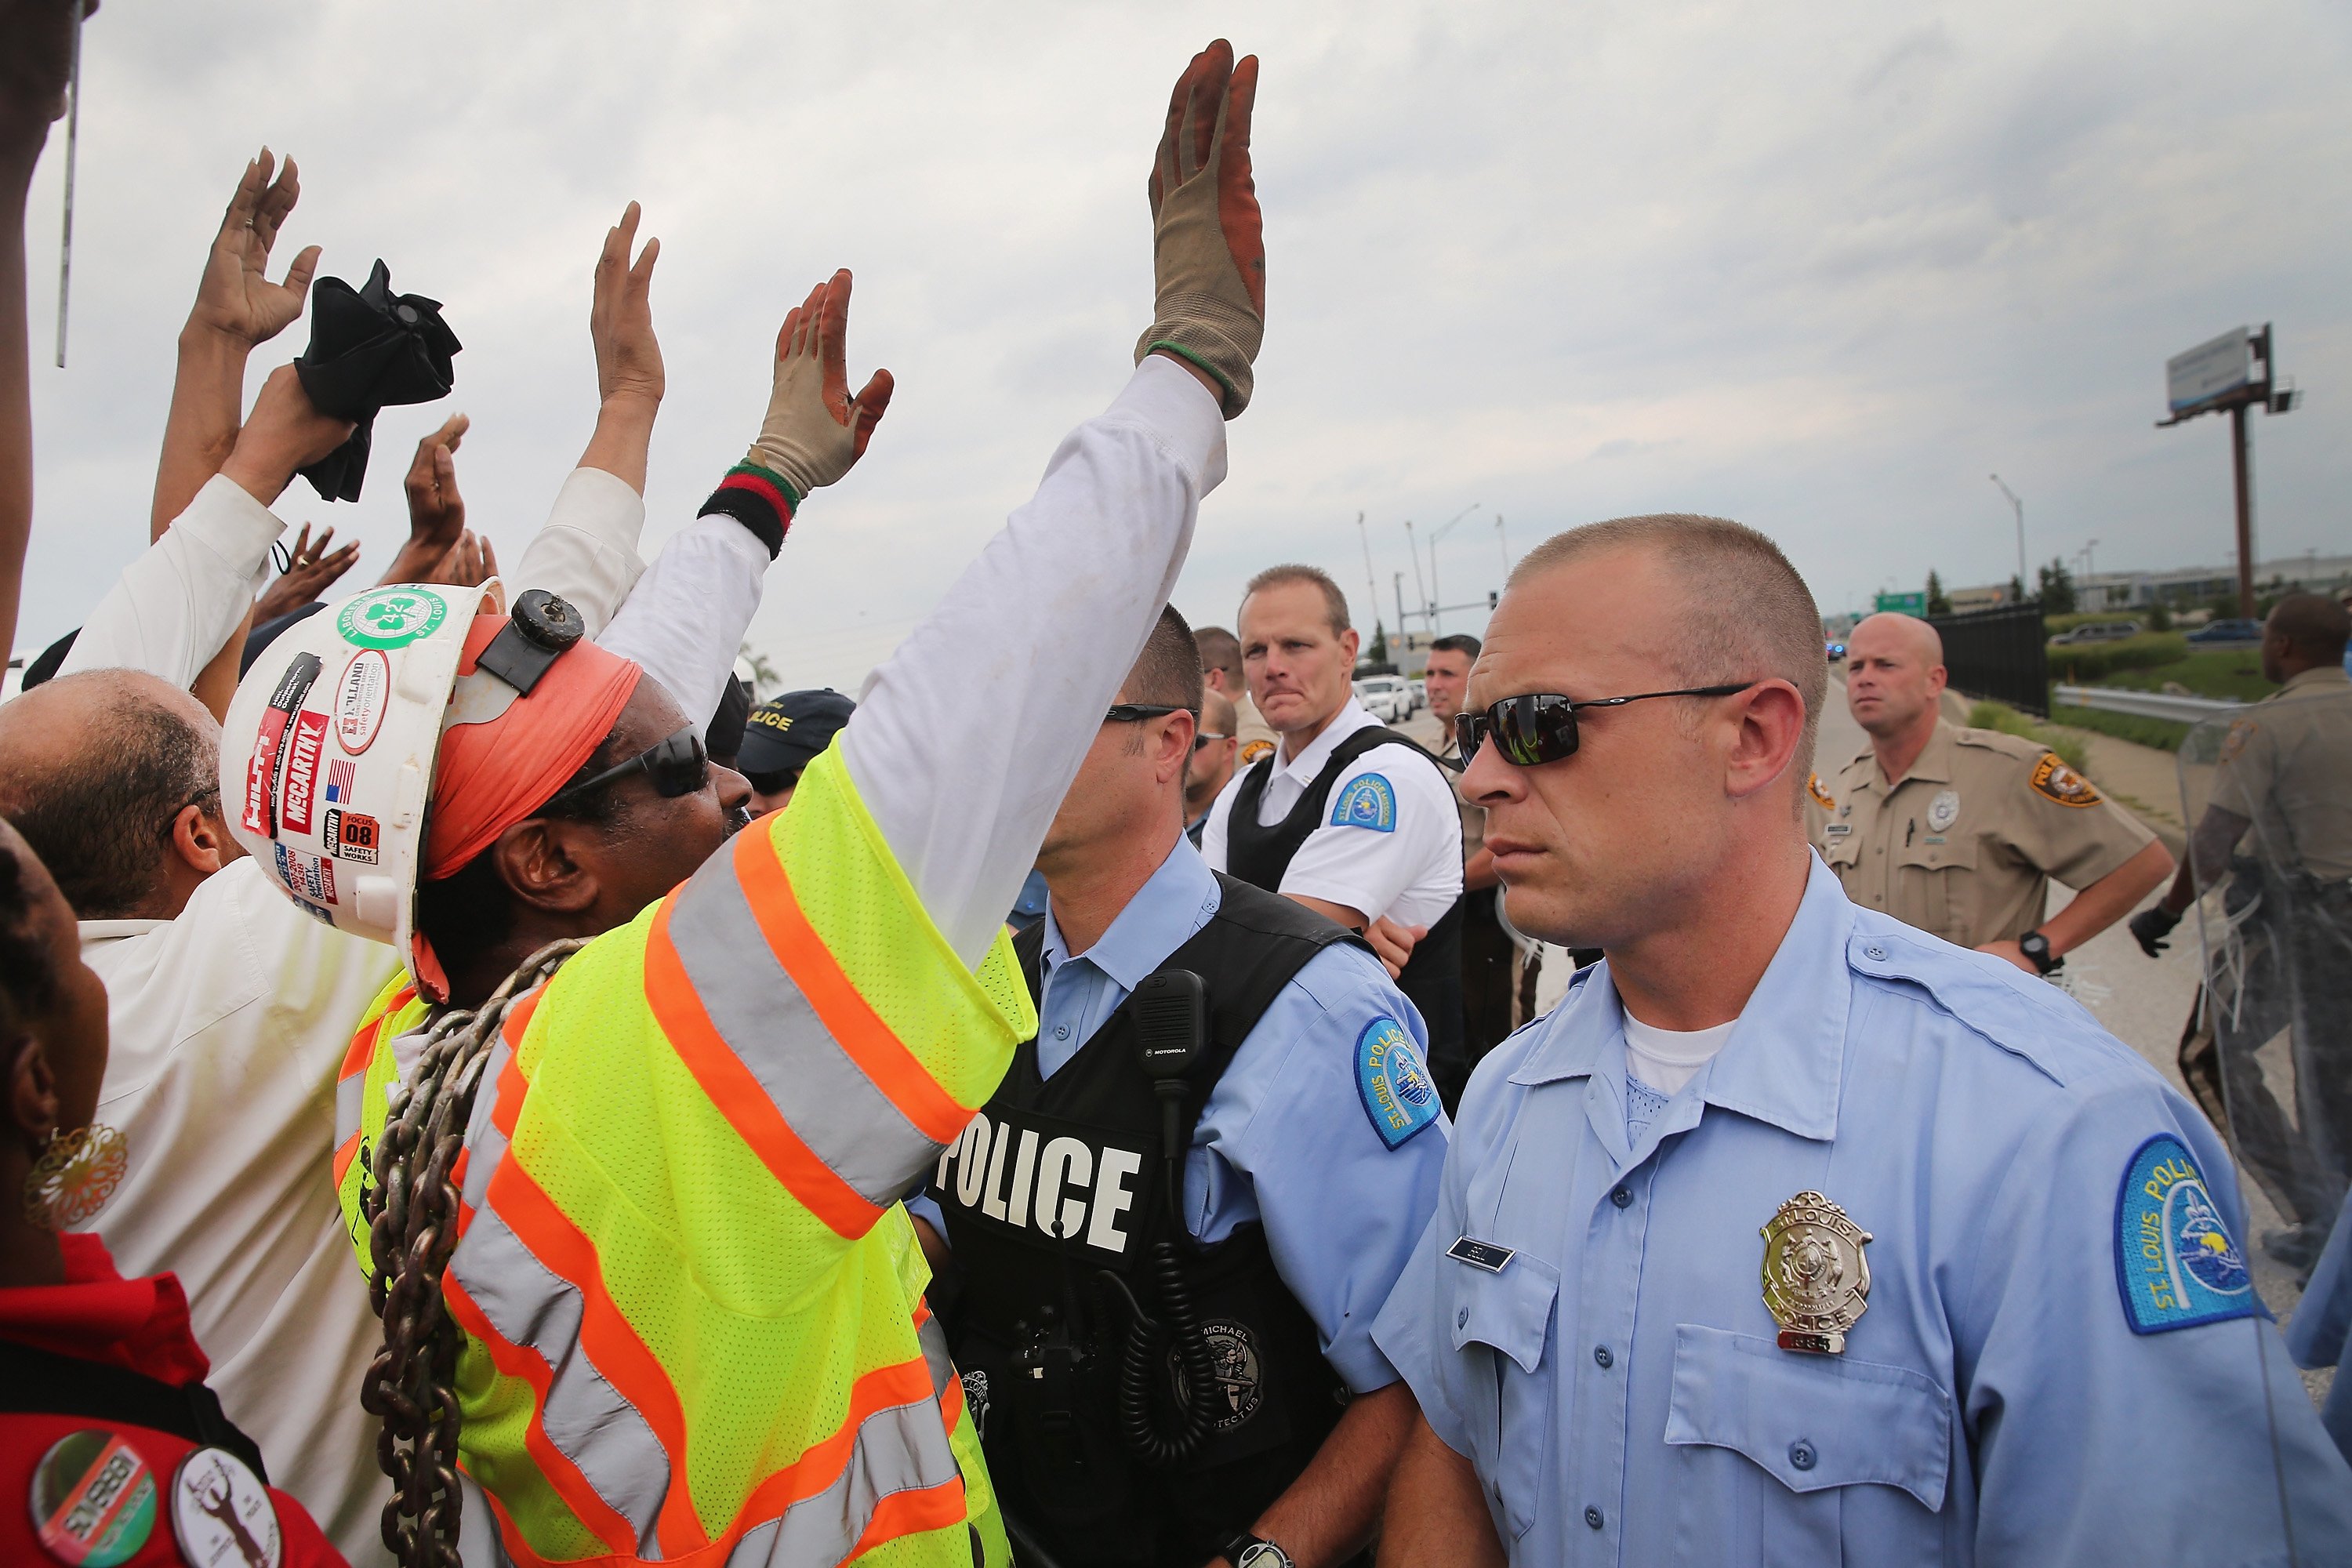 Police block demonstrators from gaining access to Interstate Highway 70 on Sept. 10, 2014 near Ferguson, Mo. (Scott Olson—Getty Images)